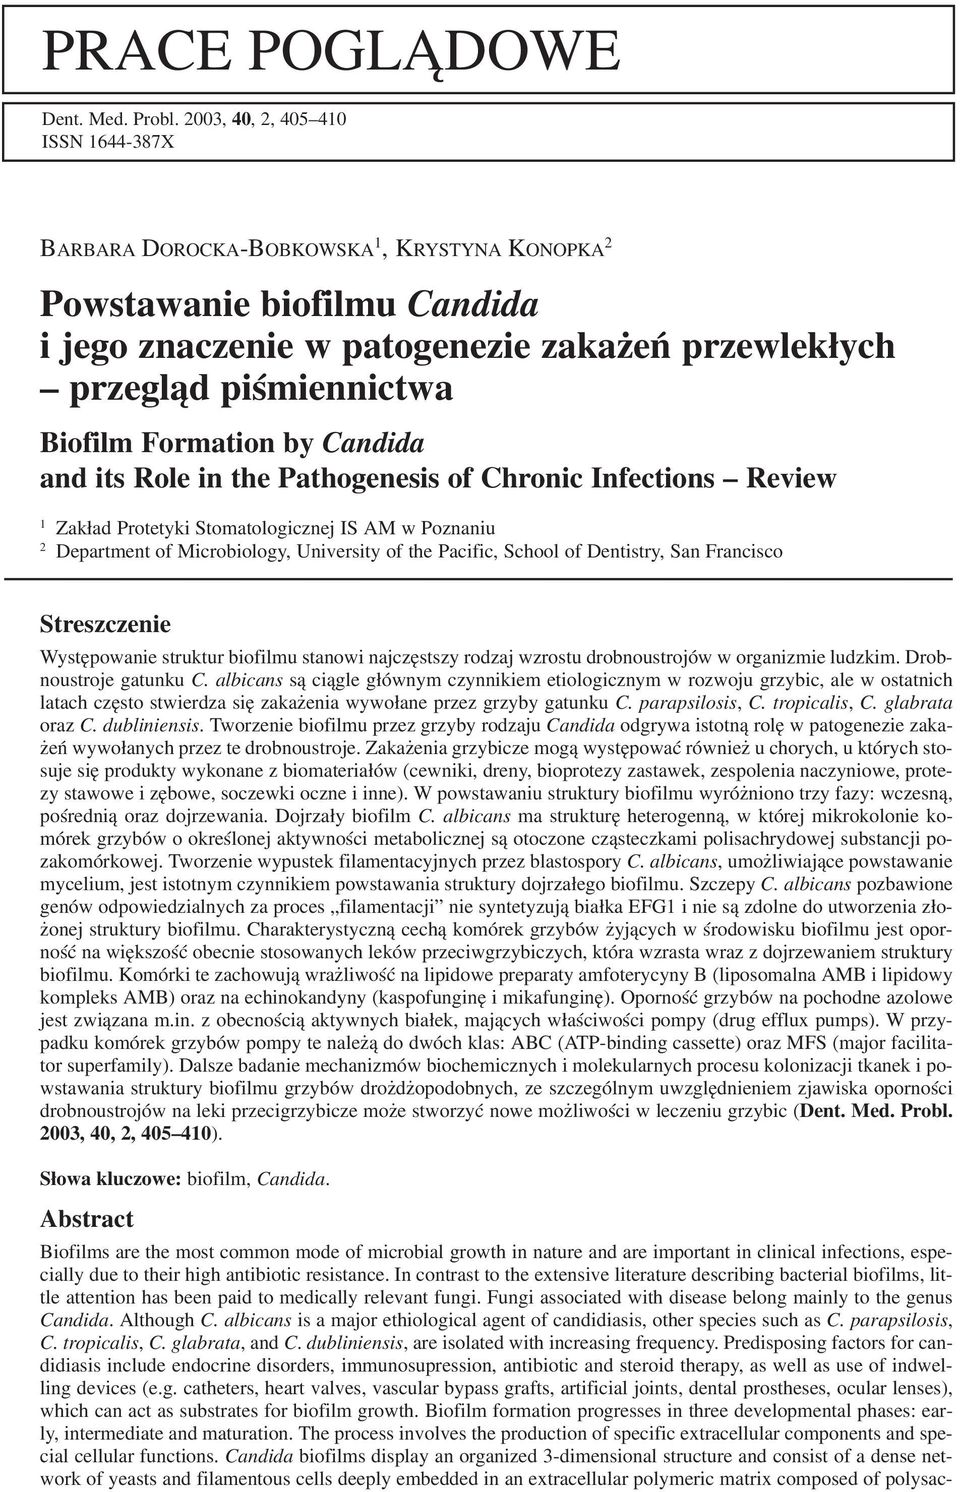 Formation by Candida and its Role in the Pathogenesis of Chronic Infections Review 1 Zakład Protetyki Stomatologicznej IS AM w Poznaniu 2 Department of Microbiology, University of the Pacific, School